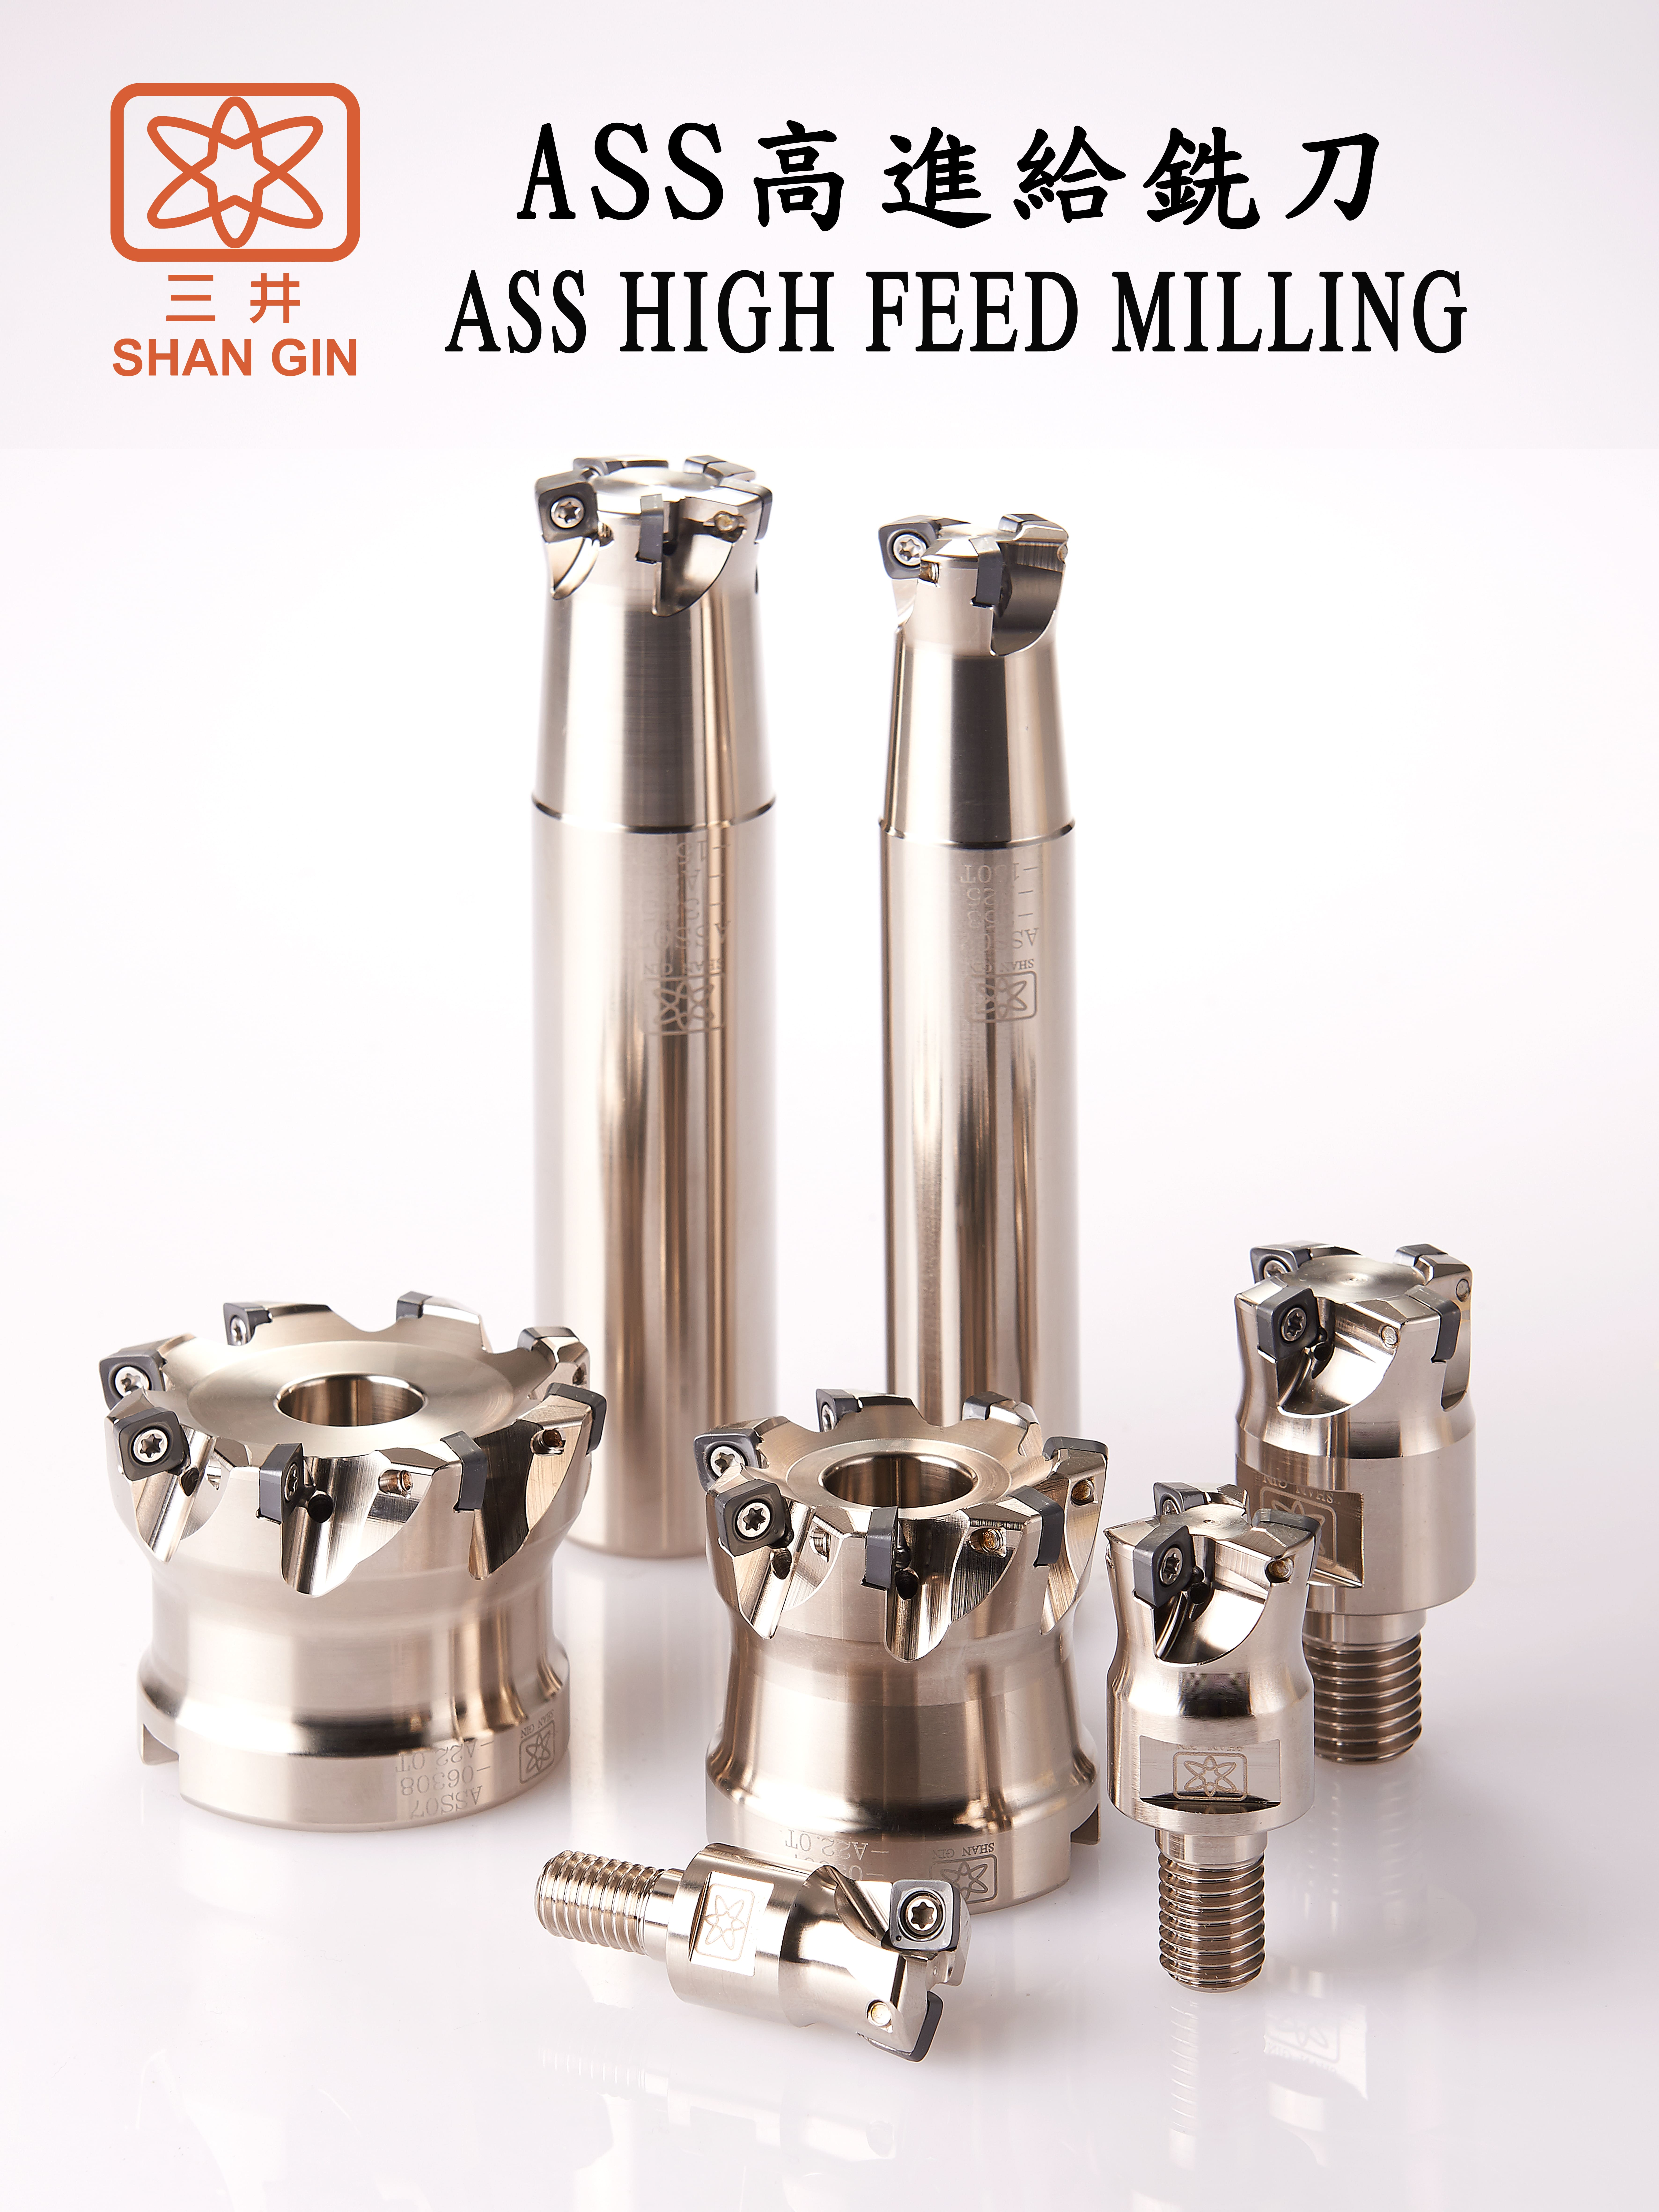 Products|ASS HIGH FEED MILLING